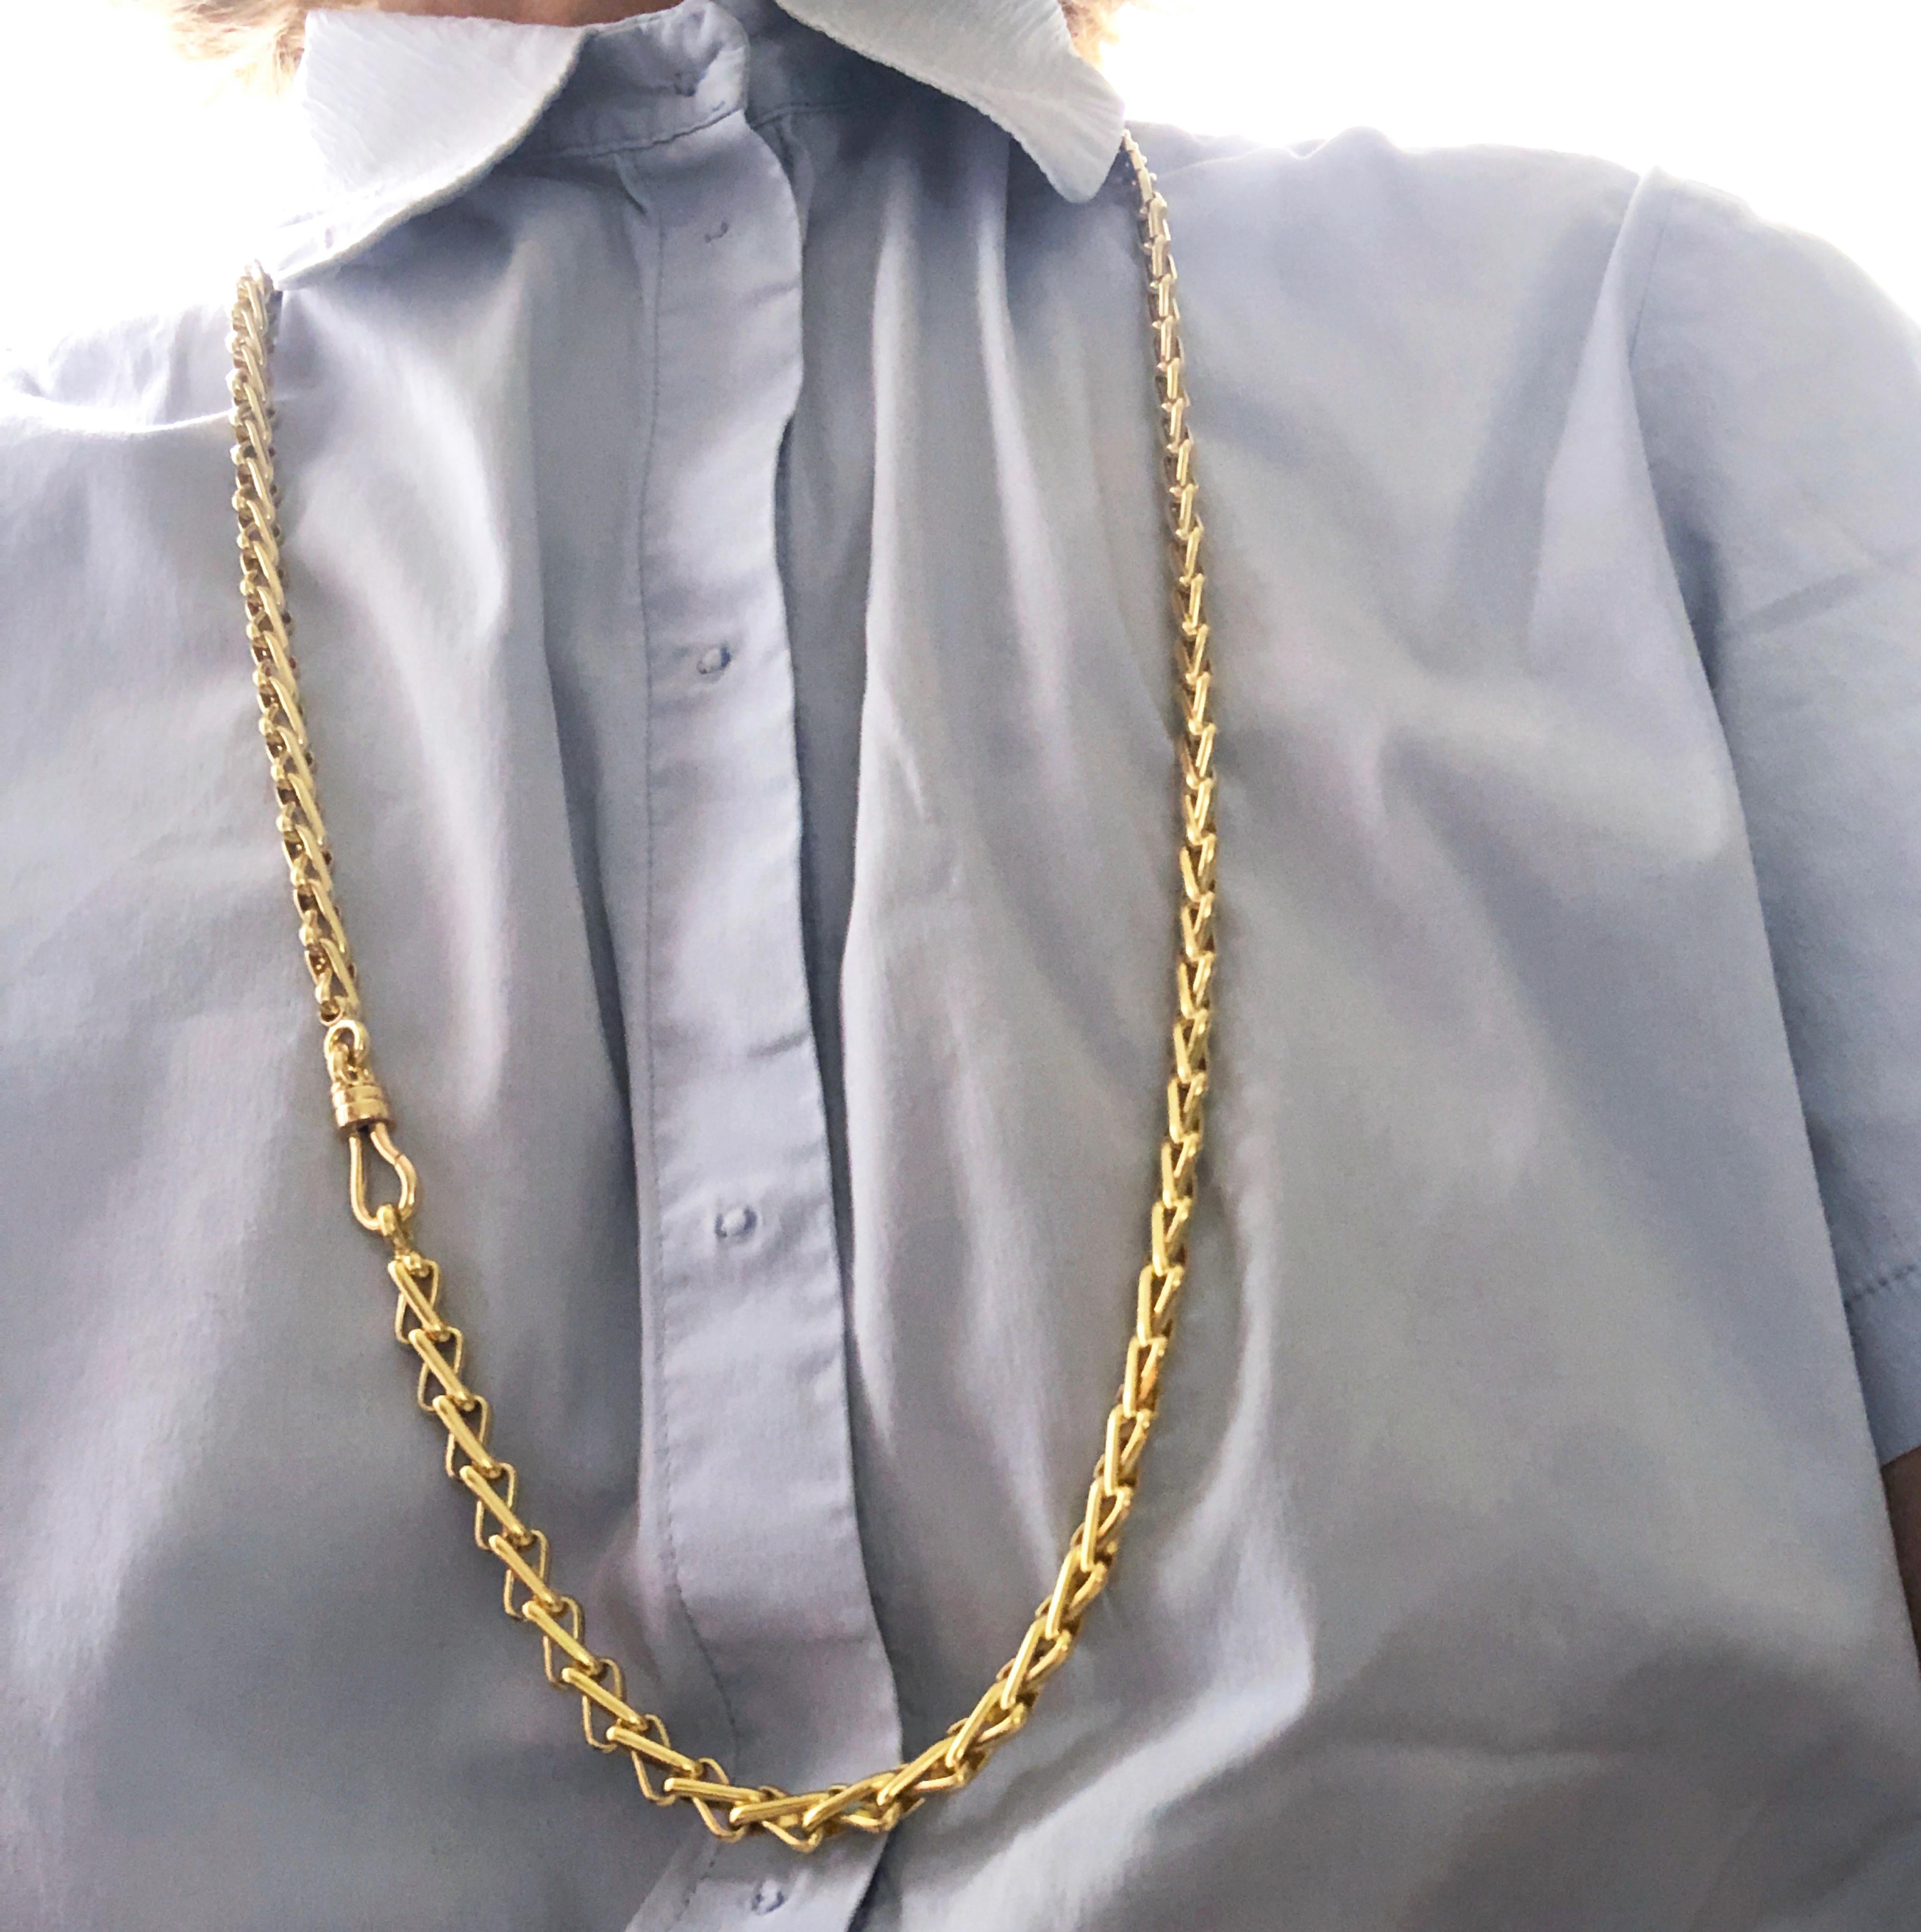 Original 1980 One-of-a-Kind Pomellato 18K Solid Yellow Gold Long Chain Necklace 2